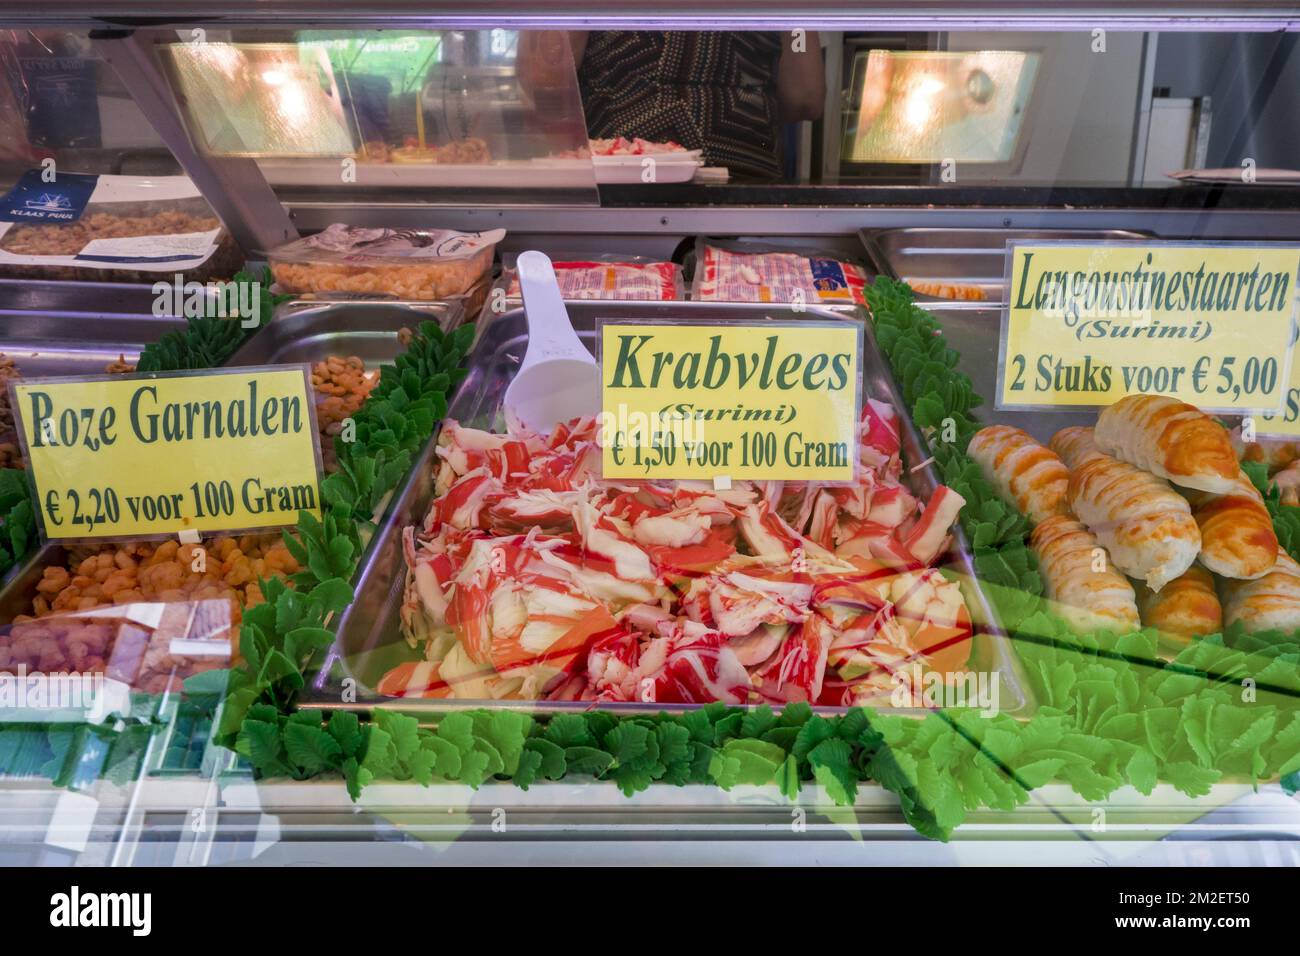 Counter with fresh seafood and surimi on display at fish stall along the Visserskaai in the city Ostend / Oostende, Belgium | Etal de poissonnier sur le quai du port d'Ostende, Belgique 19/04/2018 Stock Photo